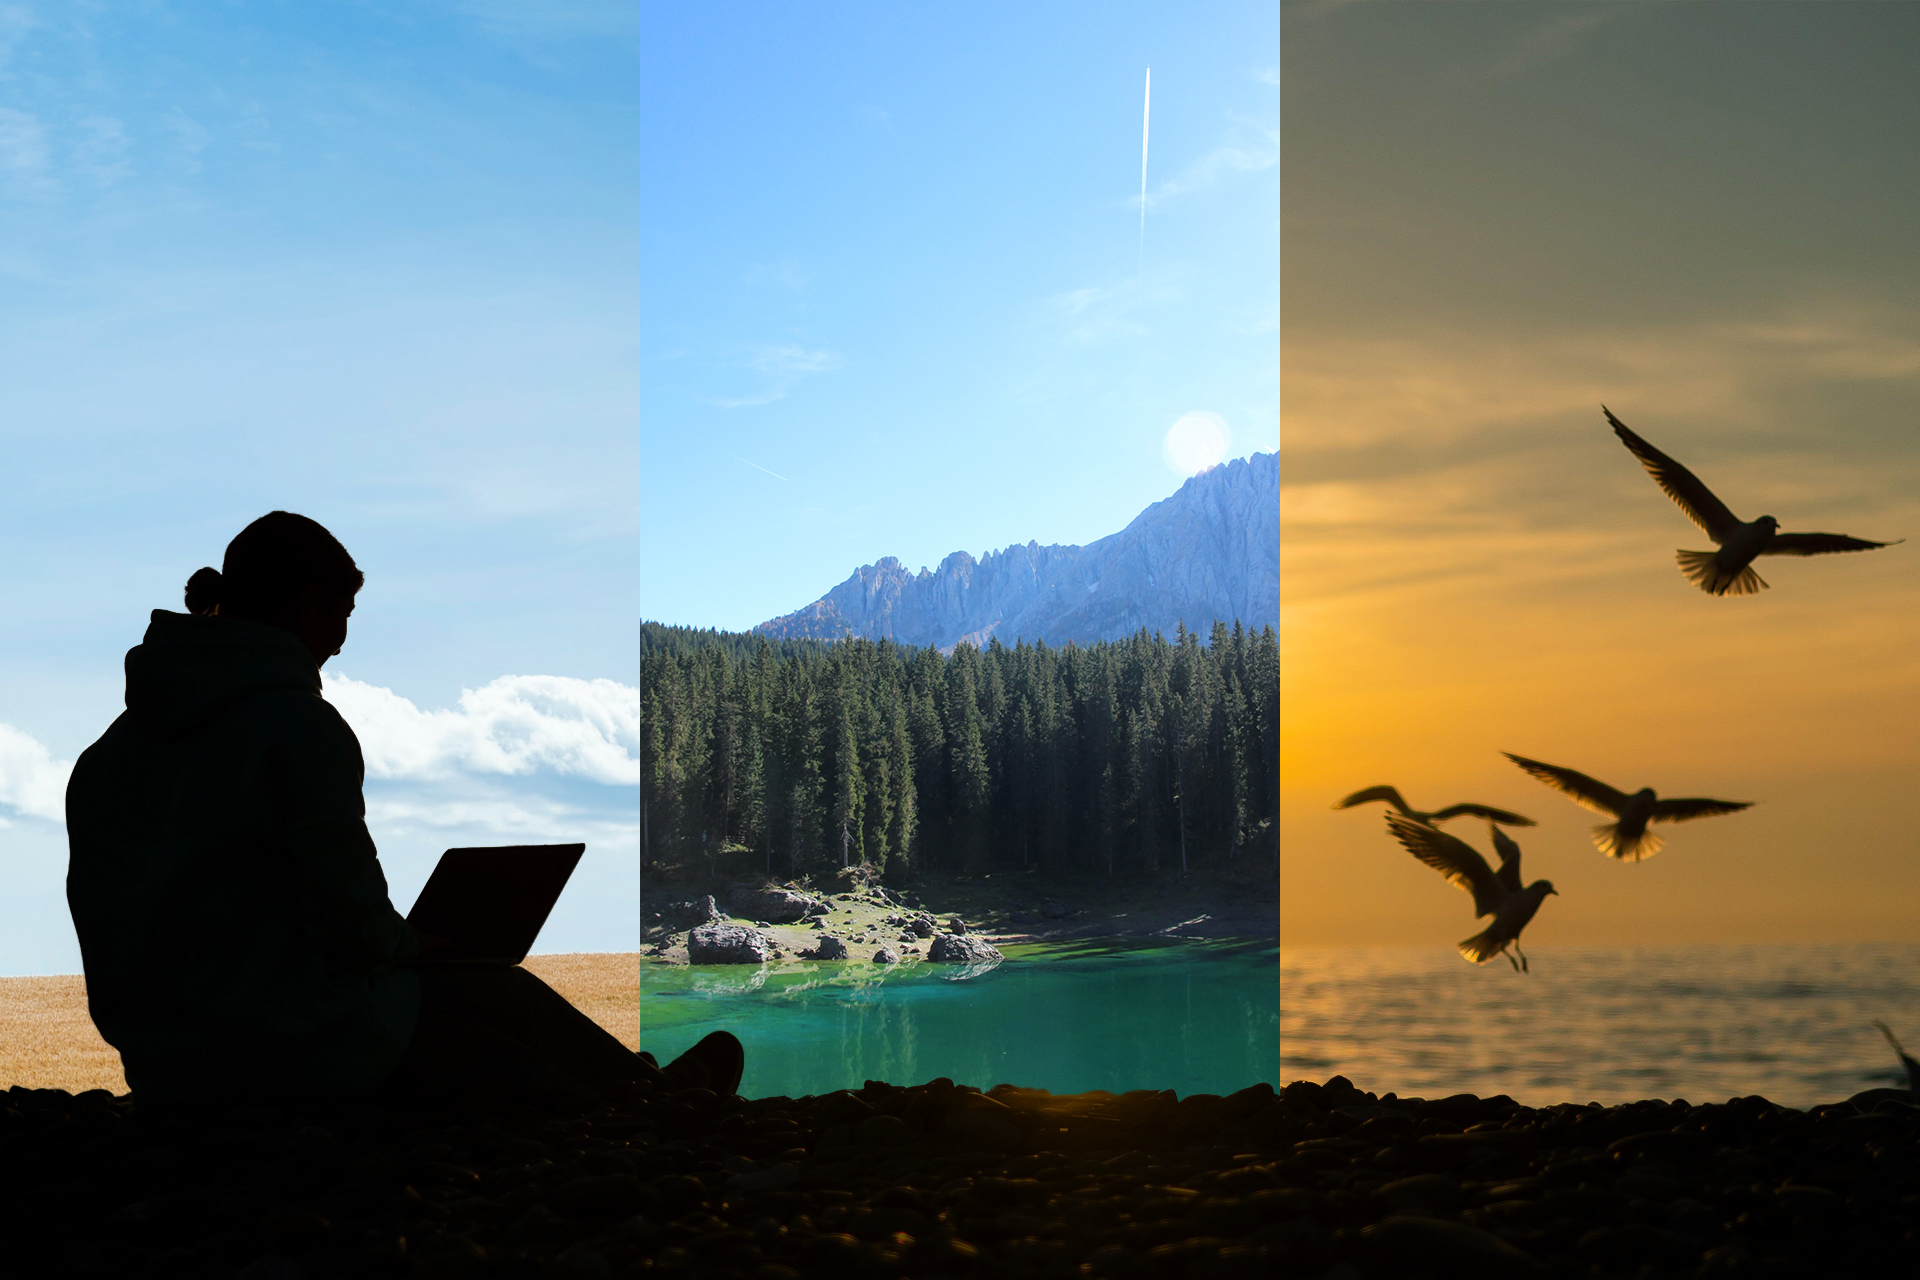 Image description: The silhouette of a person on their laptop is layered in front of a nature triptych – a field, a lake surrounded by forest, and a beach with seabirds. End of alt text.